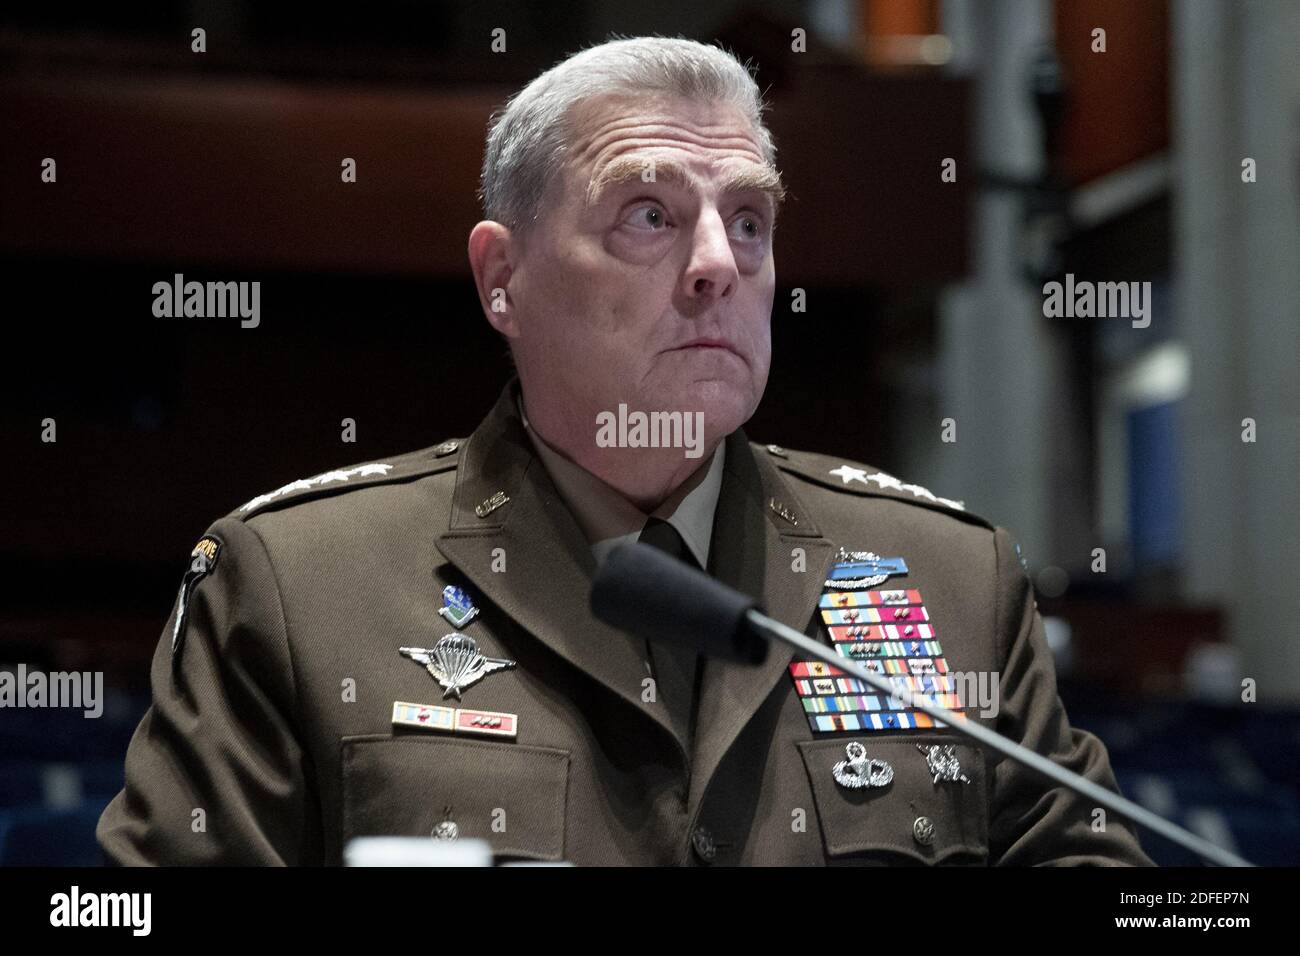 Chairman of the Joint Chiefs of Staff General Mark Milley appears before the US House Armed Services Committee hearing on 'Department of Defense Authorities and Roles Related to Civilian Law Enforcement', on Capitol Hill in Washington, DC, USA, July 9, 2020. Photo by Michael Reynolds/Pool/ABACAPRESS.COM Stock Photo